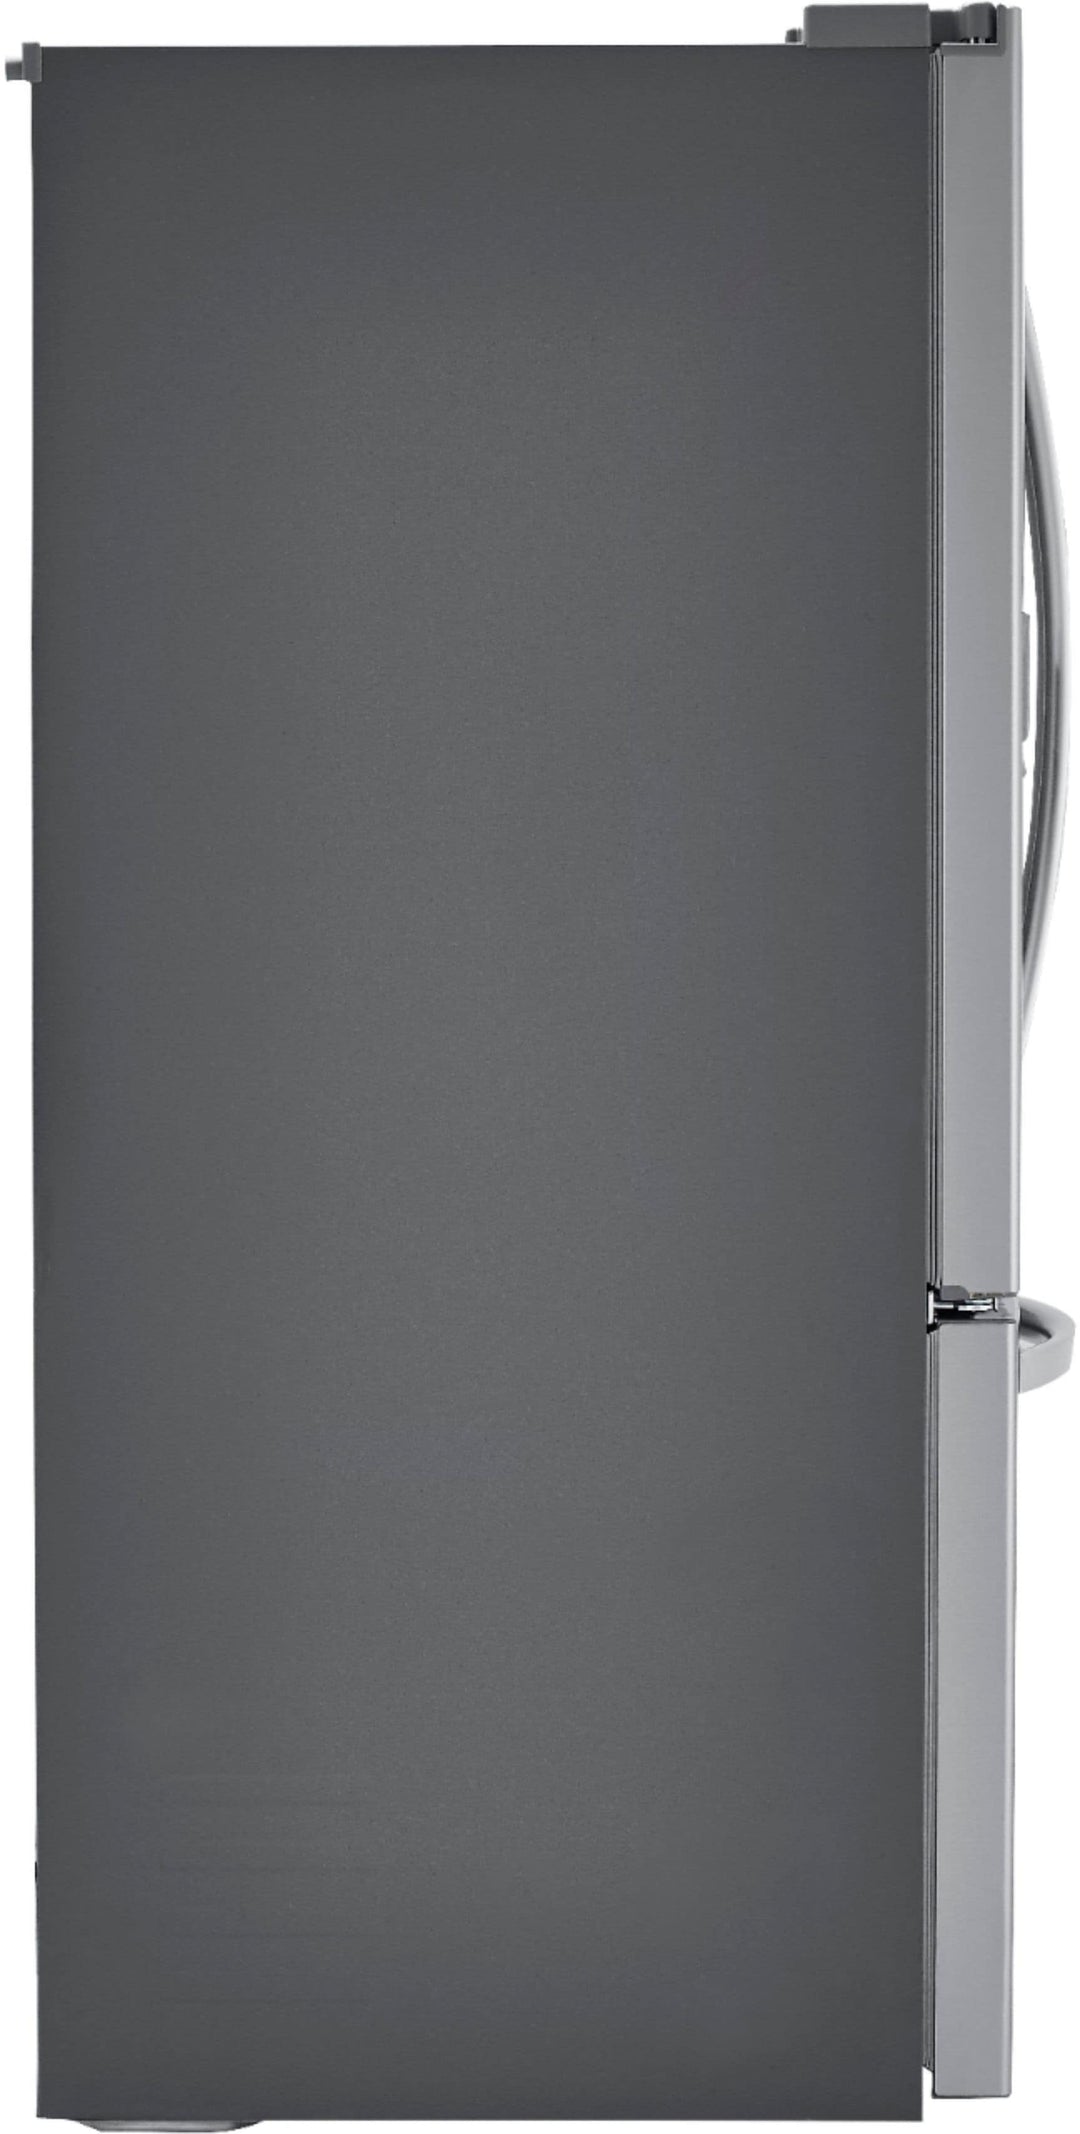 LG - 24.5 Cu. Ft. French Door Smart Refrigerator with External Tall Ice and Water - Stainless steel_26